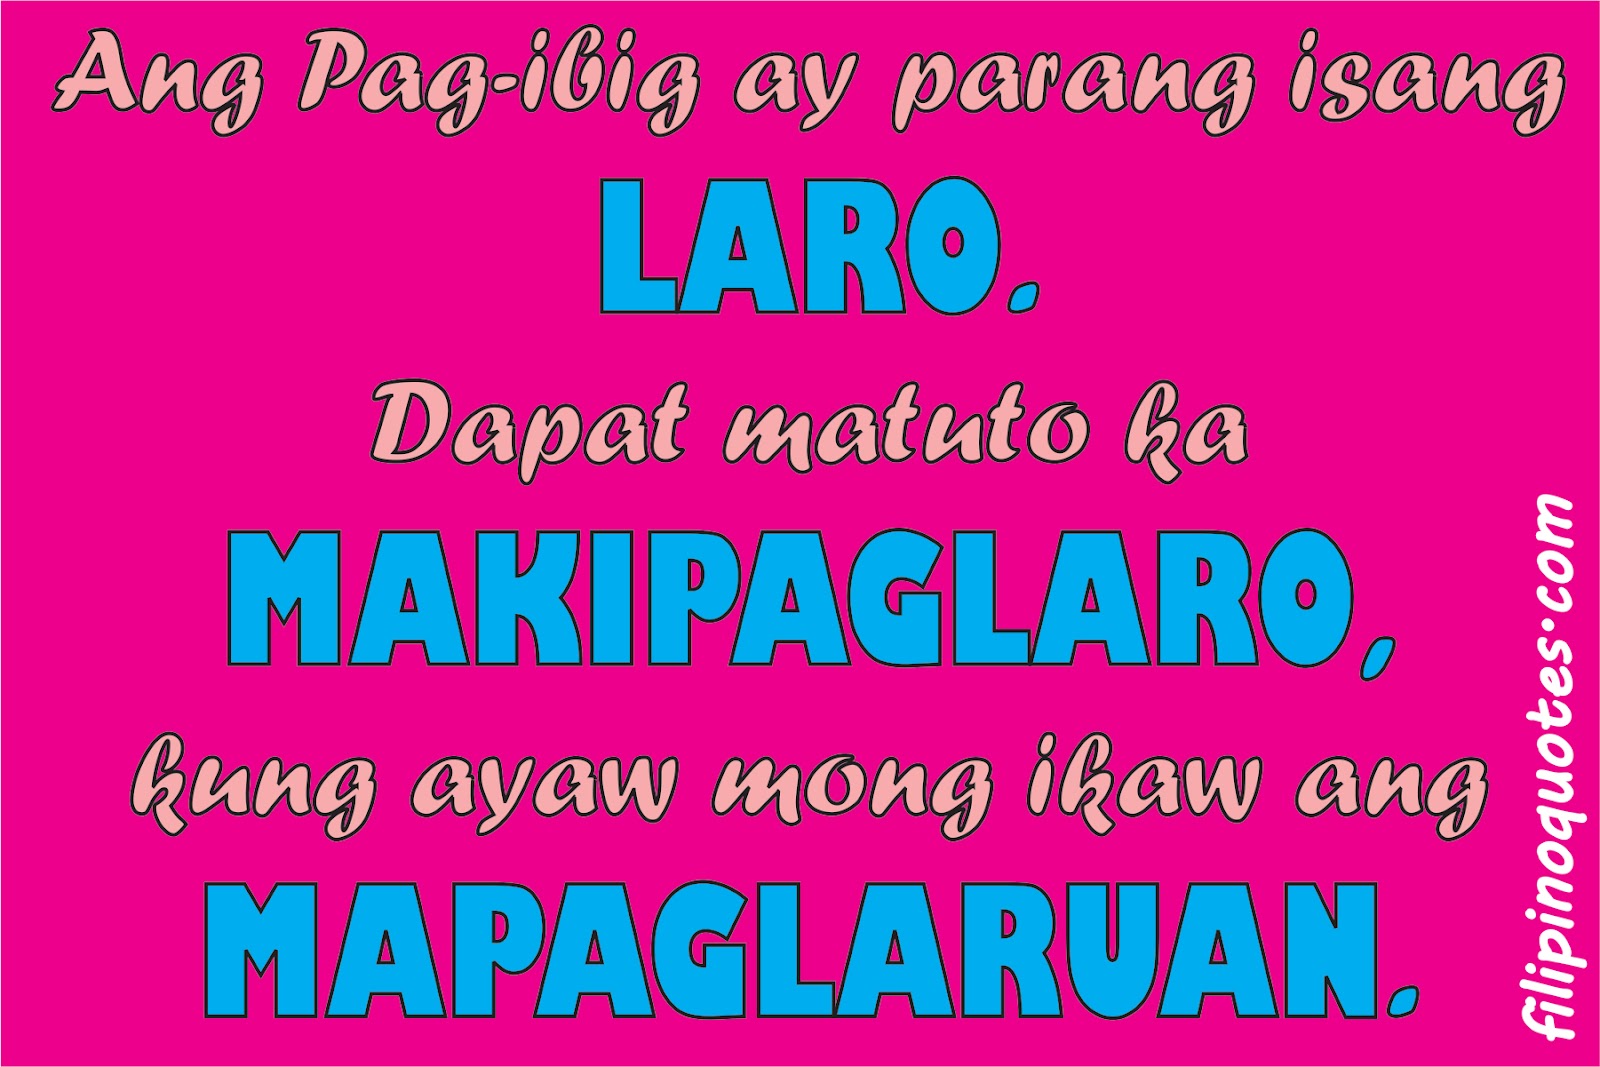 Tagalog Quotes And Sayings. QuotesGram